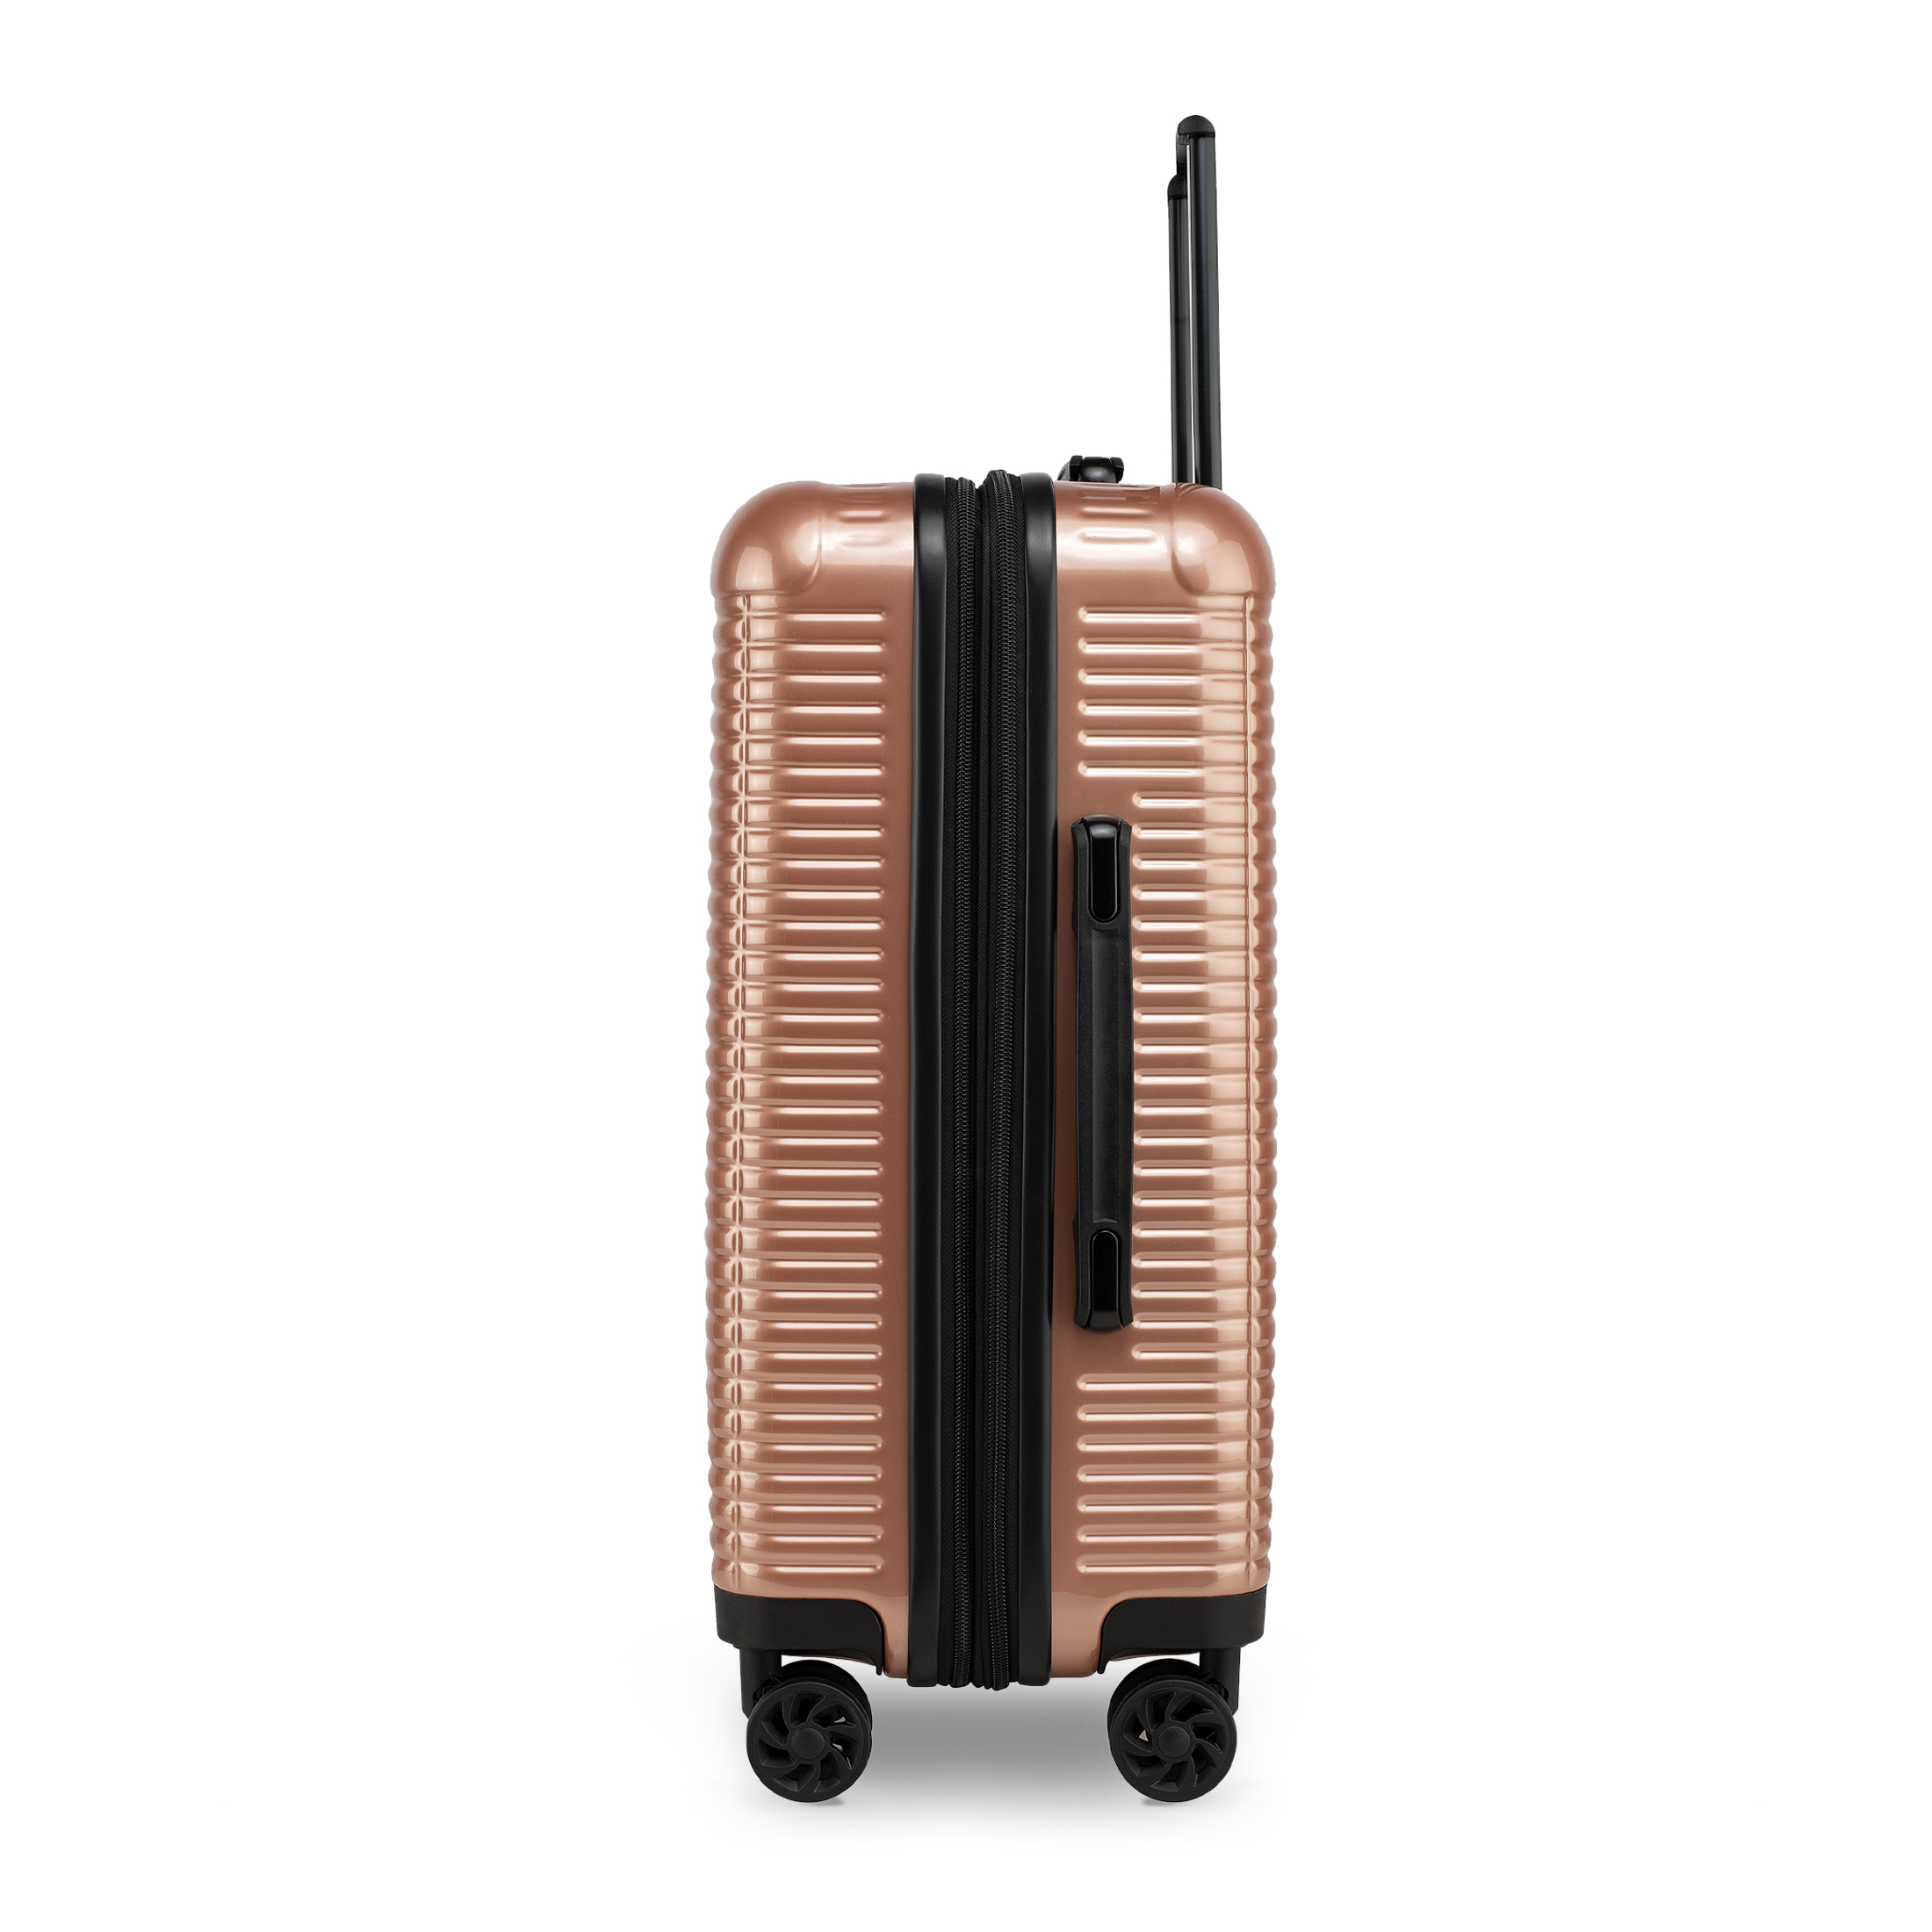 iFLY Hardside Alloy 20 Inch Carry-on, Copper - image 5 of 9